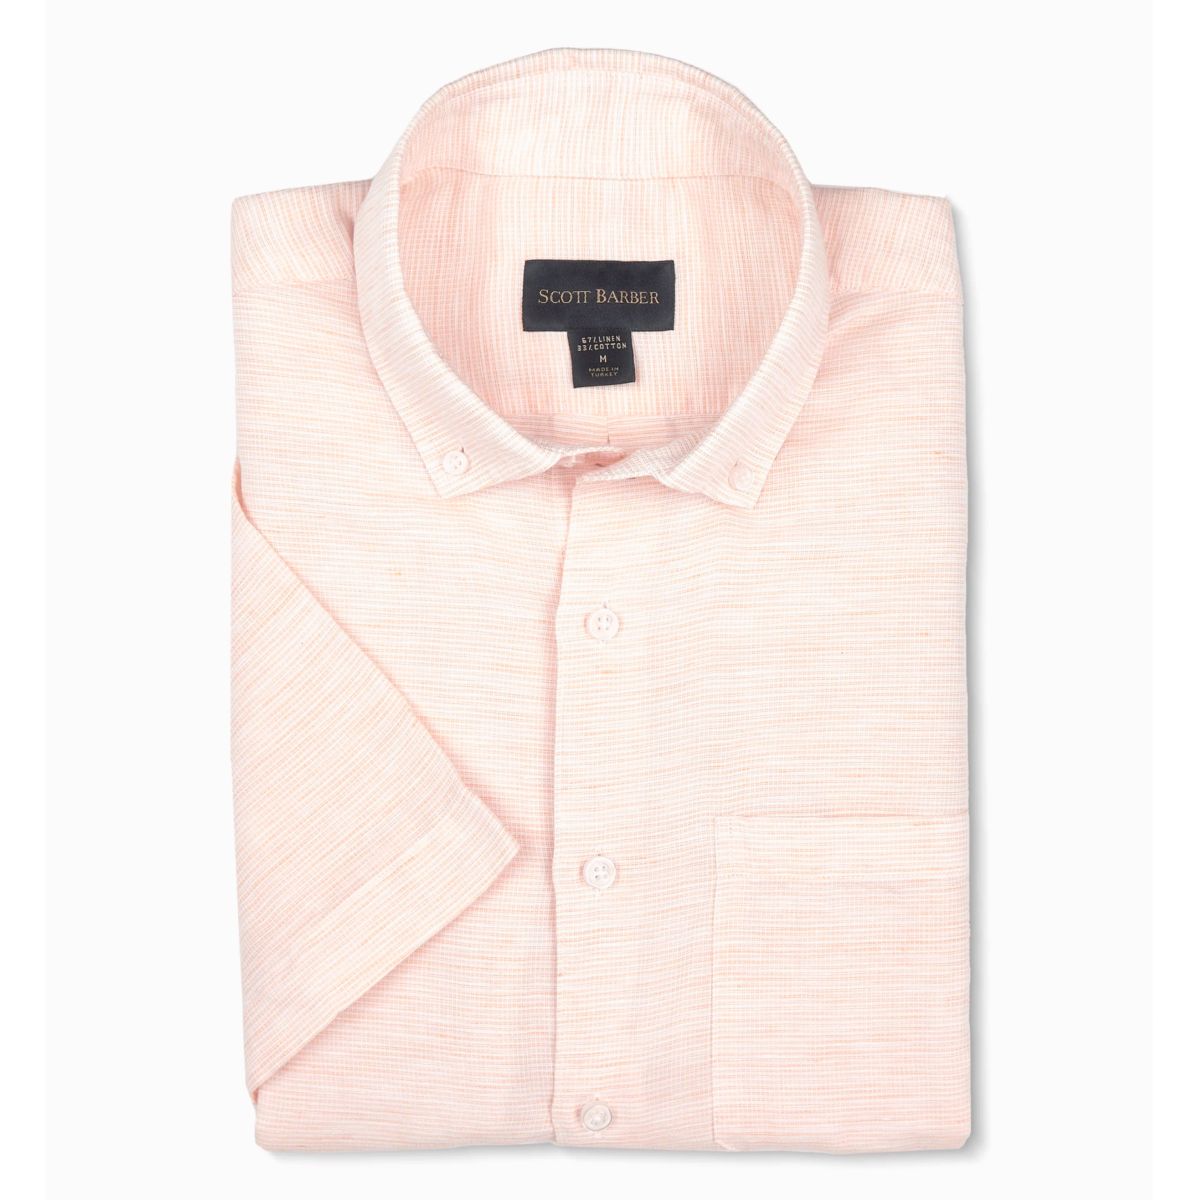 Linen and Cotton Barre Short Sleeve Sport Shirt in Apricot by Scott Barber